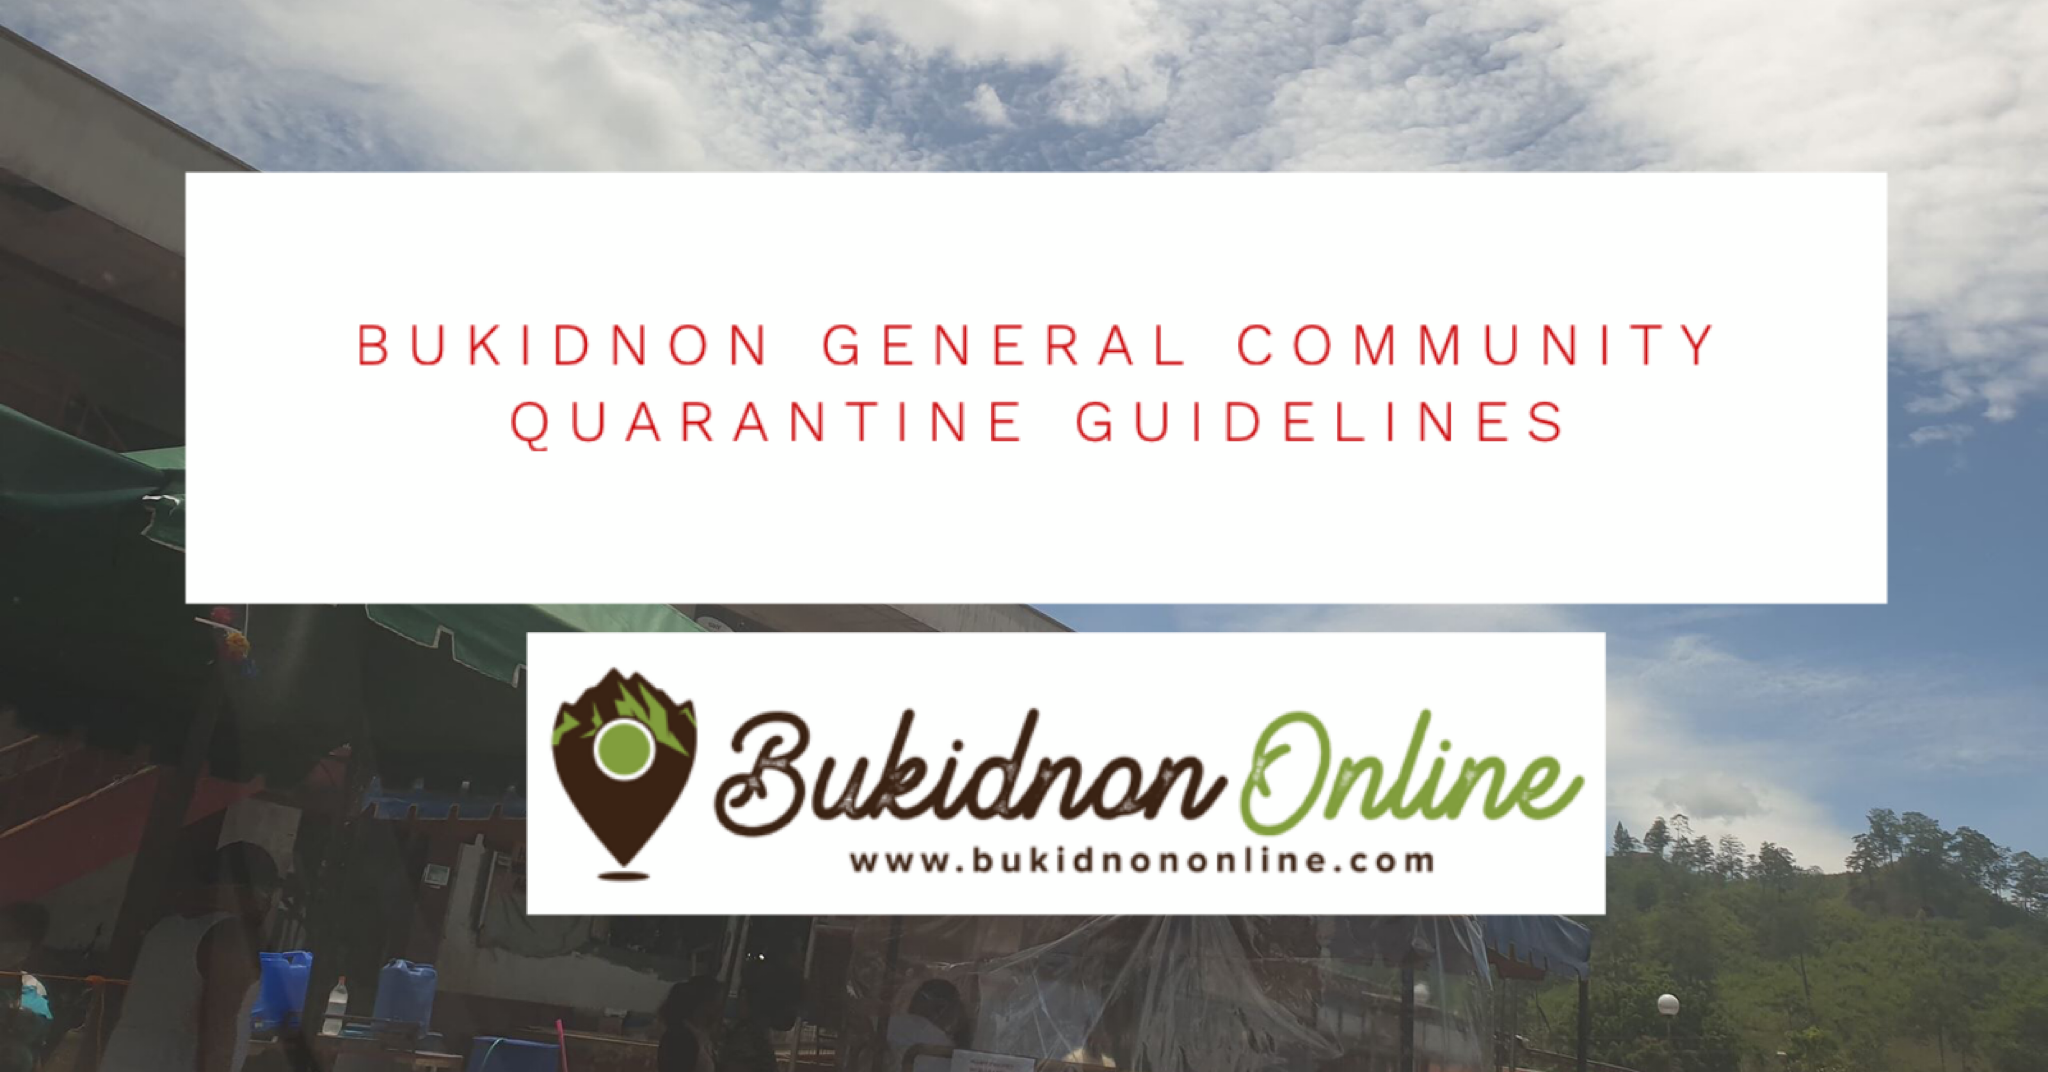 What you need to know about the Bukidnon General Community Quarantine guidelines